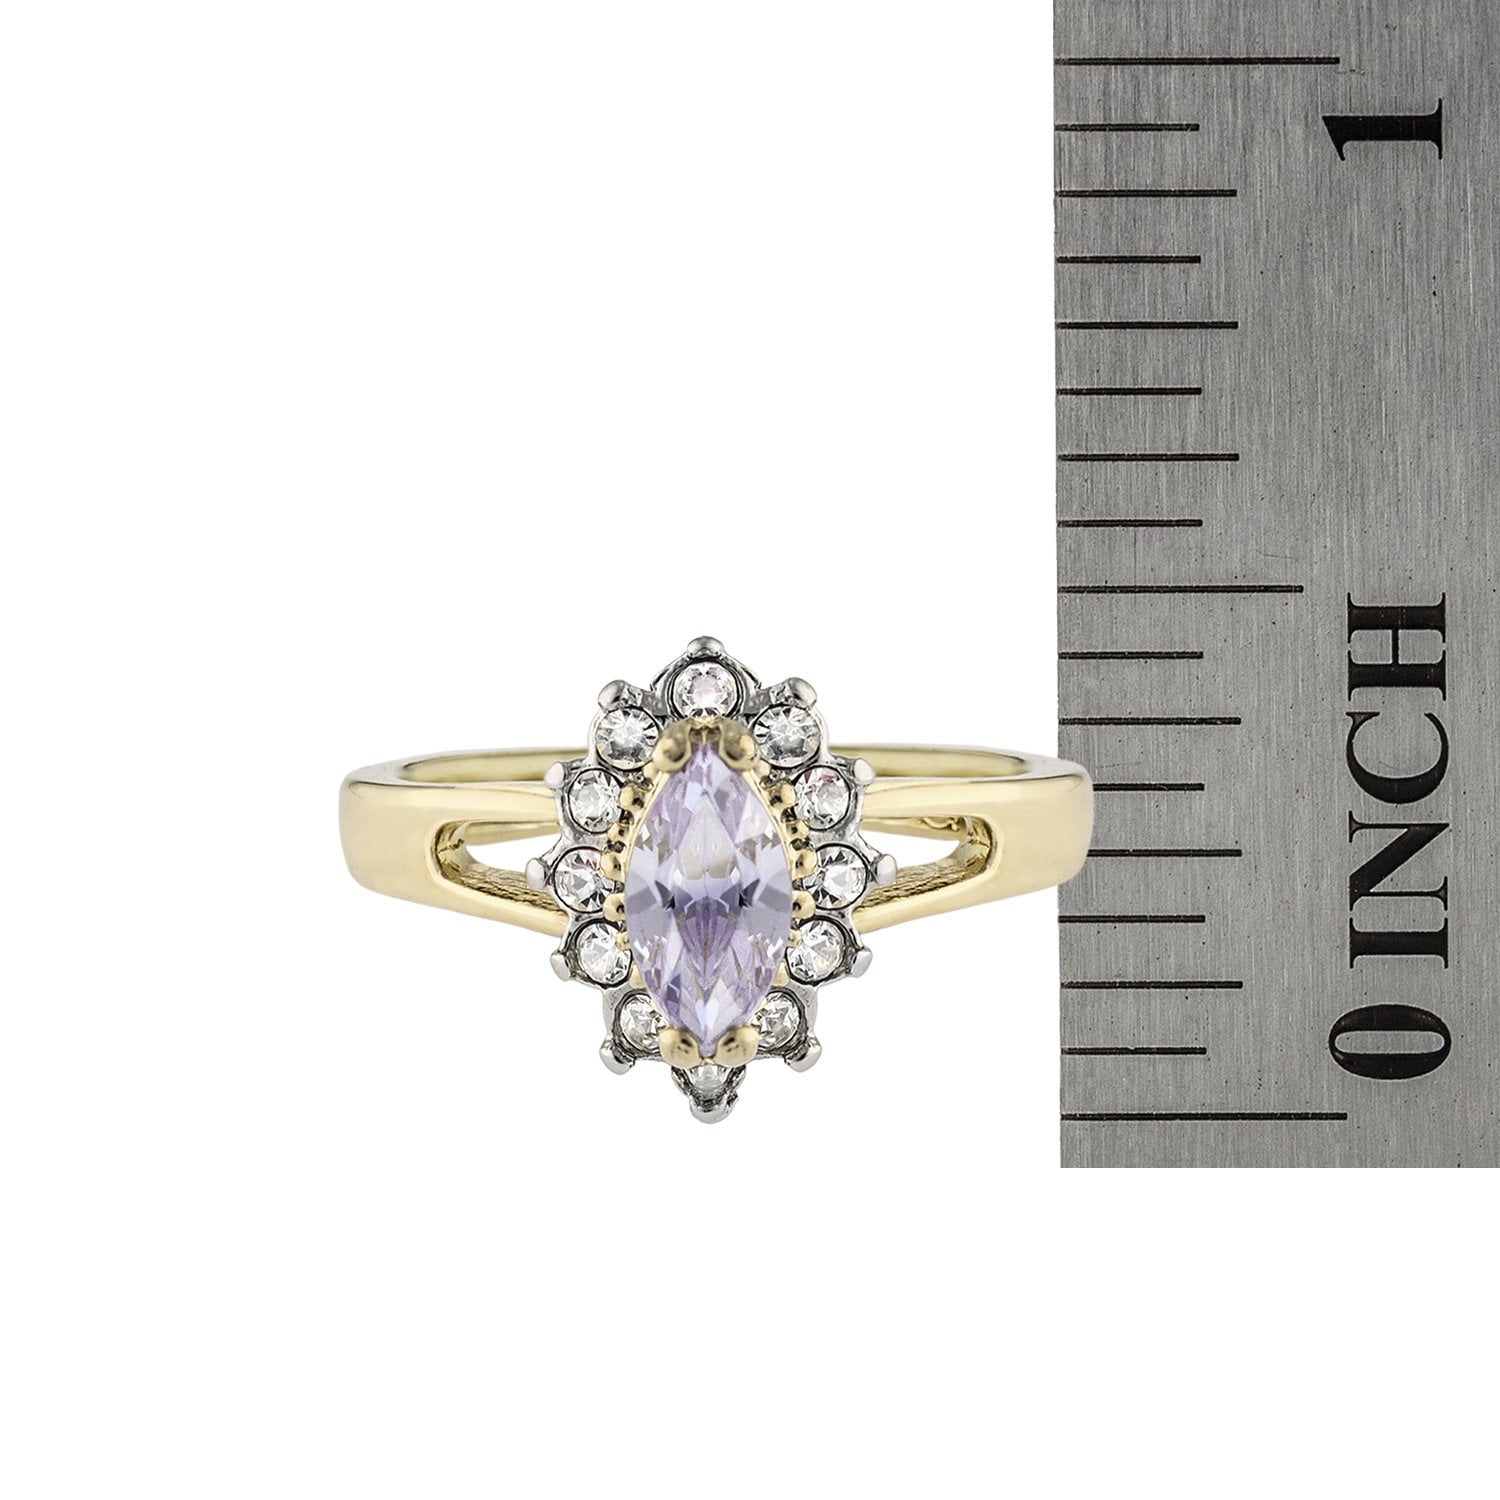 Vintage Ring Alexandrite Cubic Zirconia and Clear Swarovski Crystals 18kt Gold #R1314 - Limited Stock - Never Worn